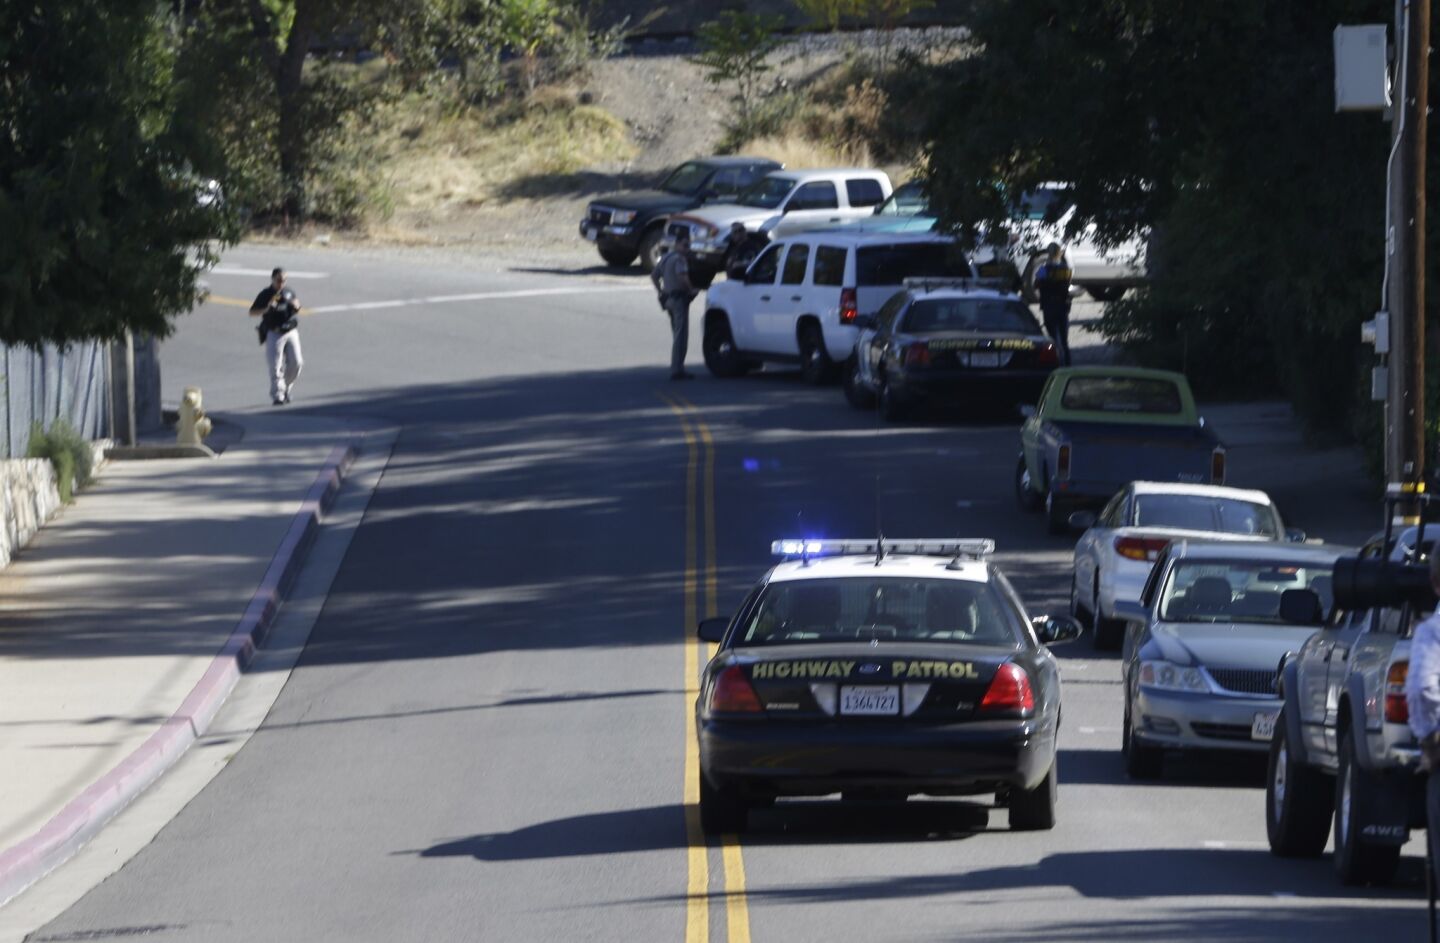 A California Highway Patrol car and other law enforcement vehicles set up a roadblock near Placer High School leading to a rural area where authorities were searching for an assailant who shot three sheriff's deputies in two Northern California counties.